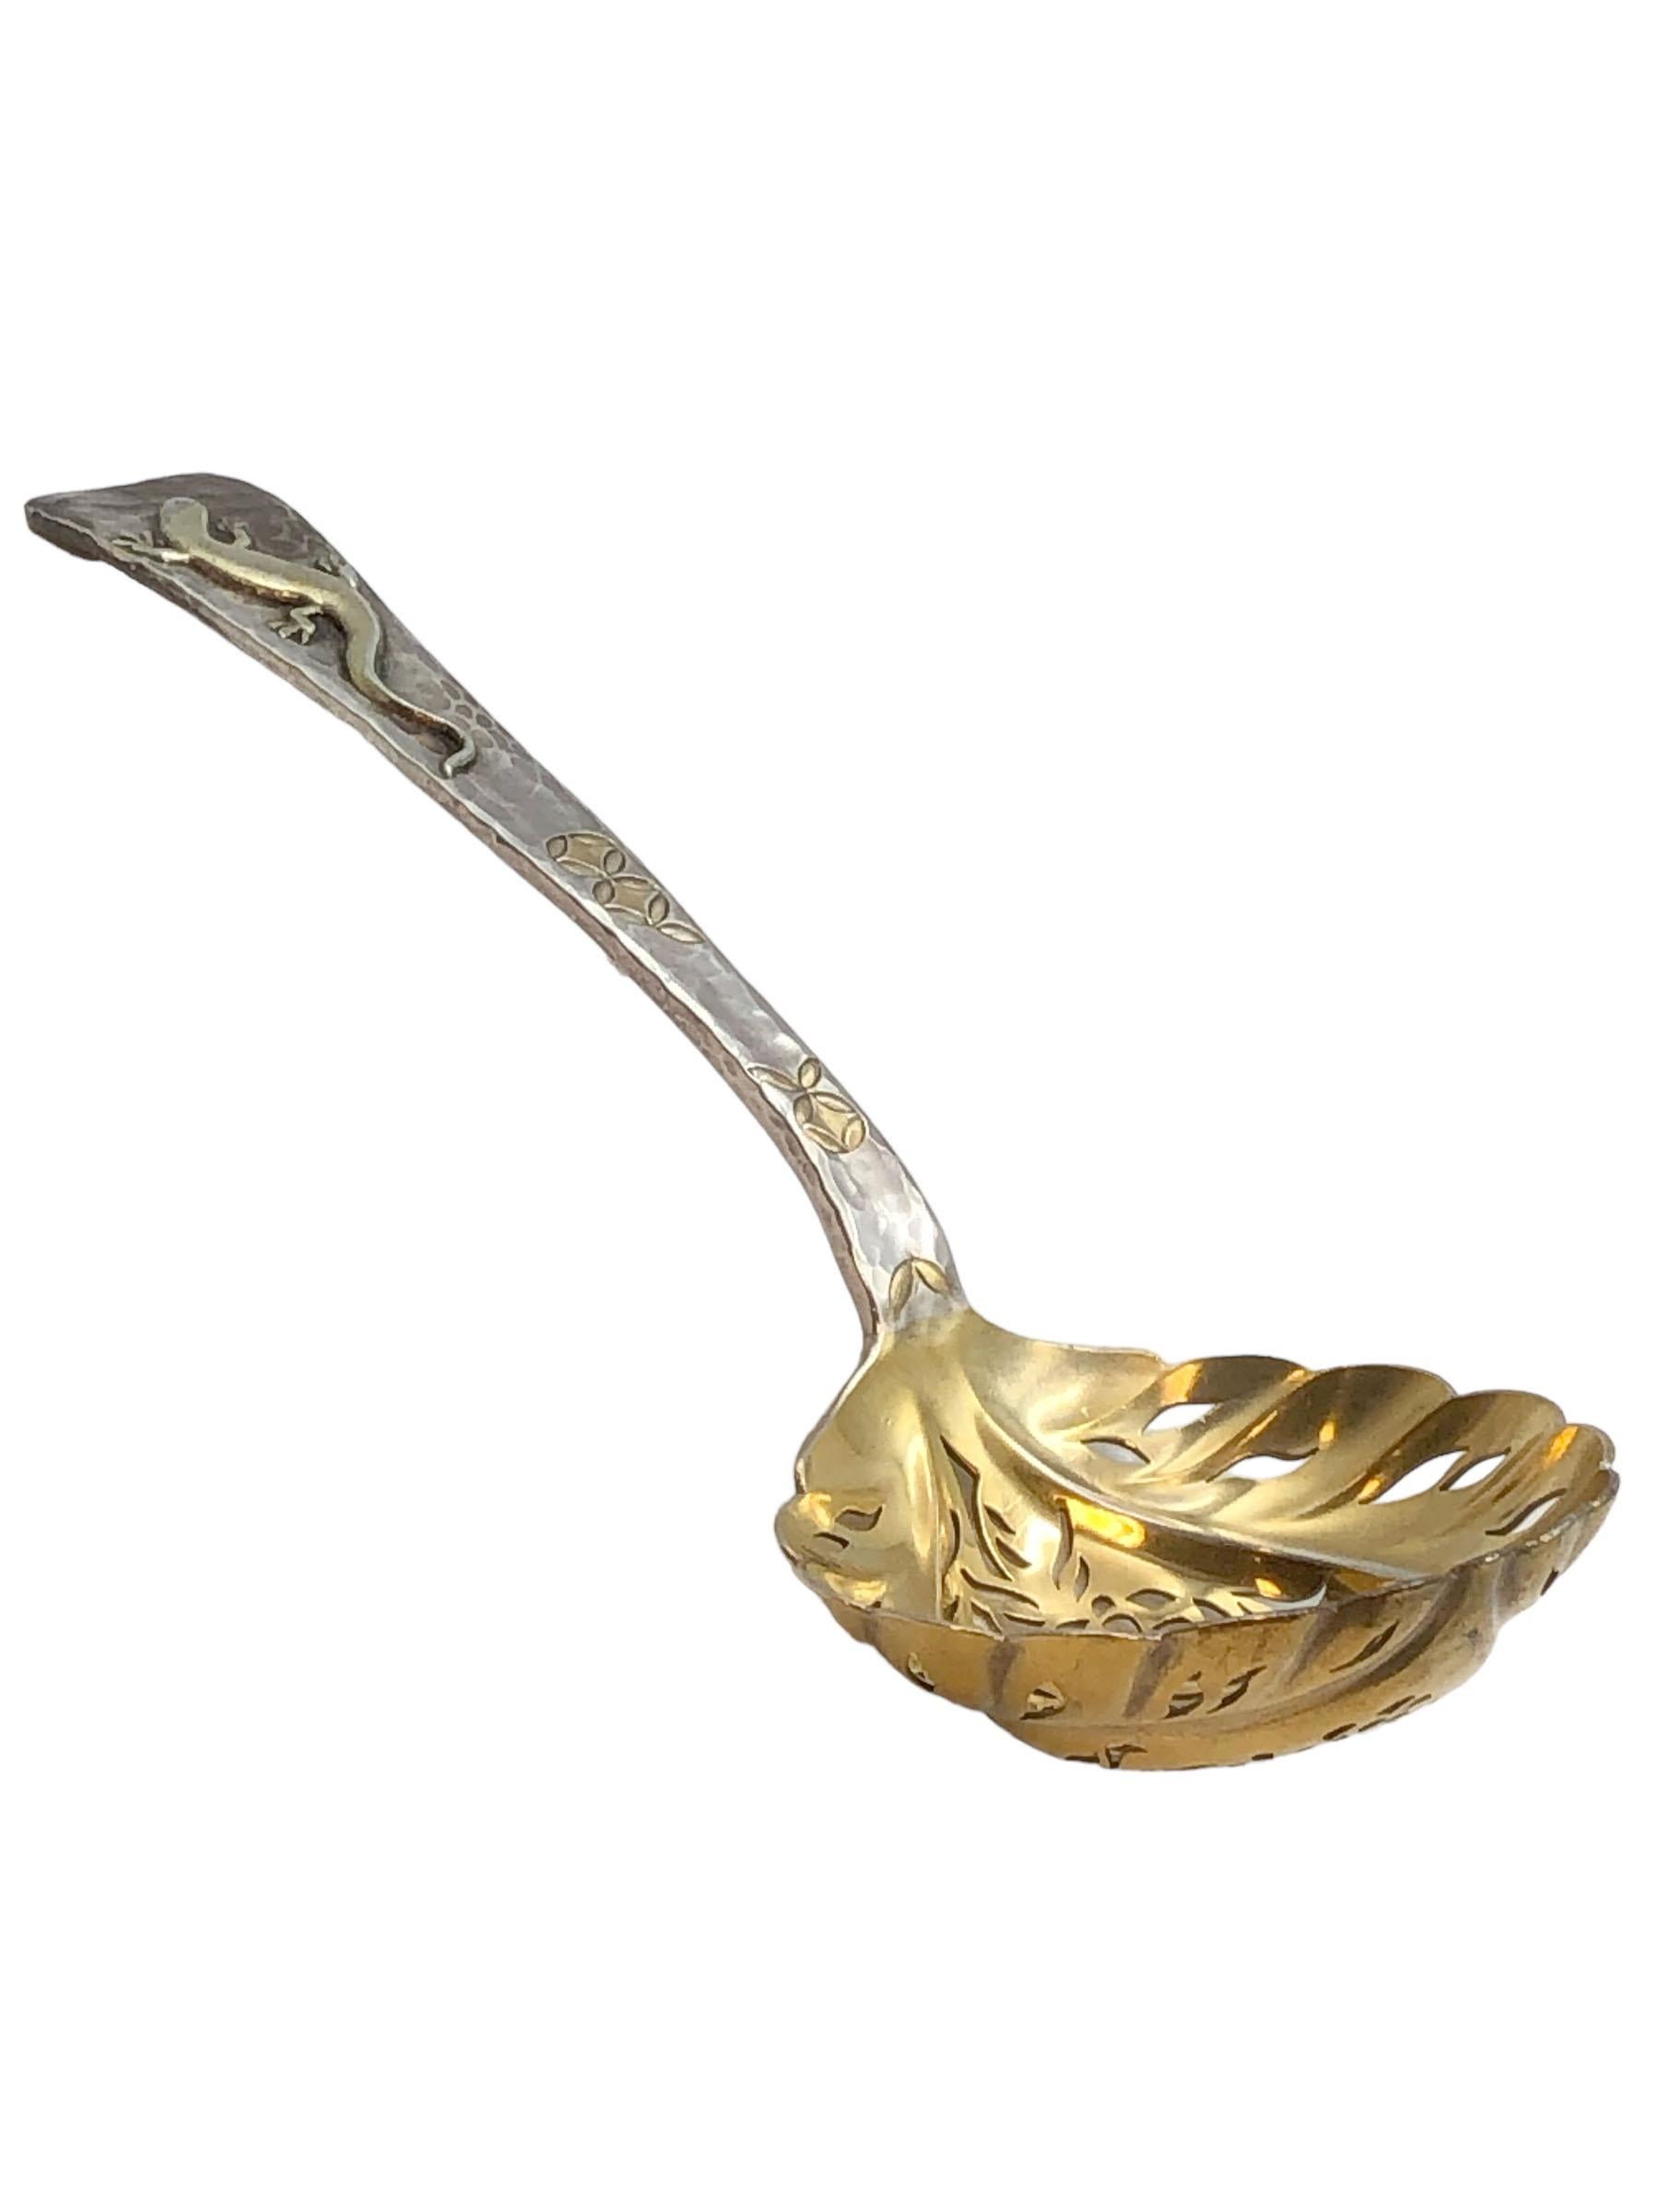 Tiffany & Company Antique Aesthetic Period Vegetable server For Sale 1